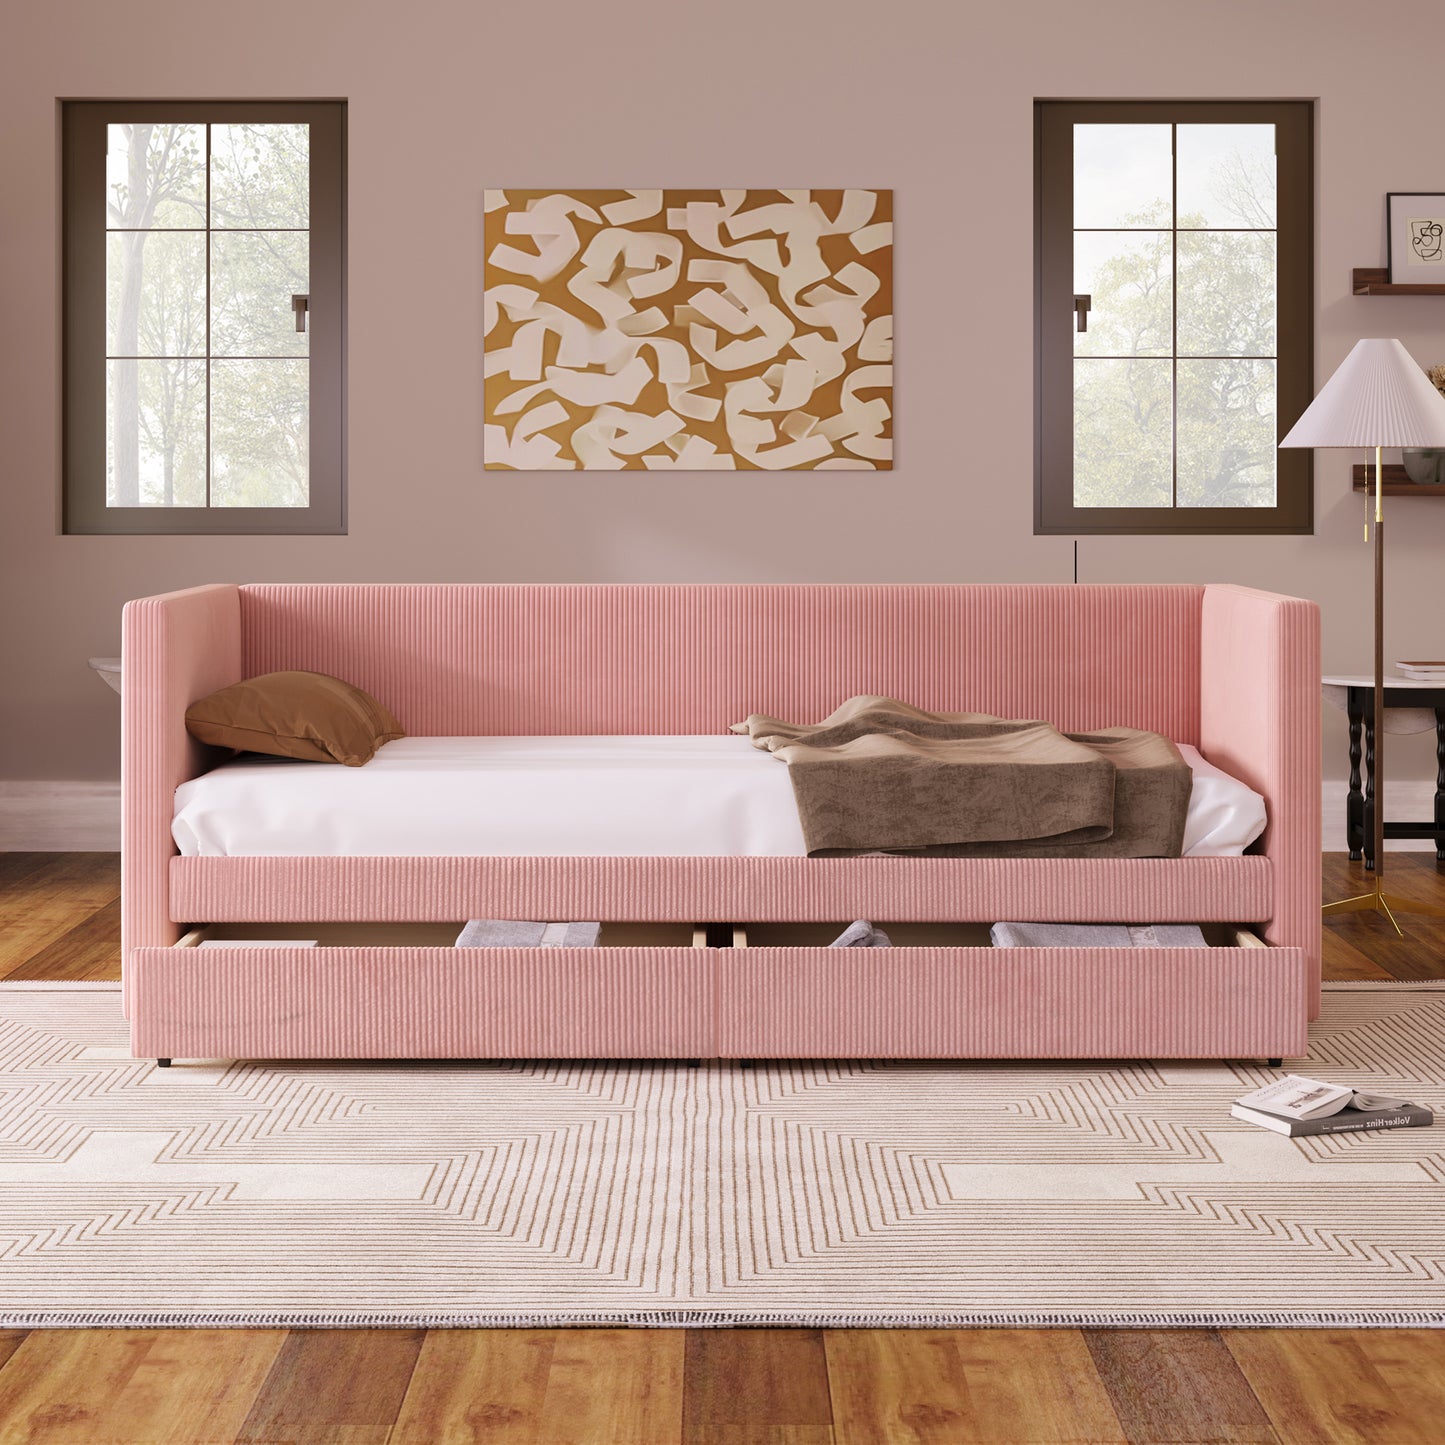 Twin Size Corduroy Daybed with Two Drawers and Wood Slat, Pink